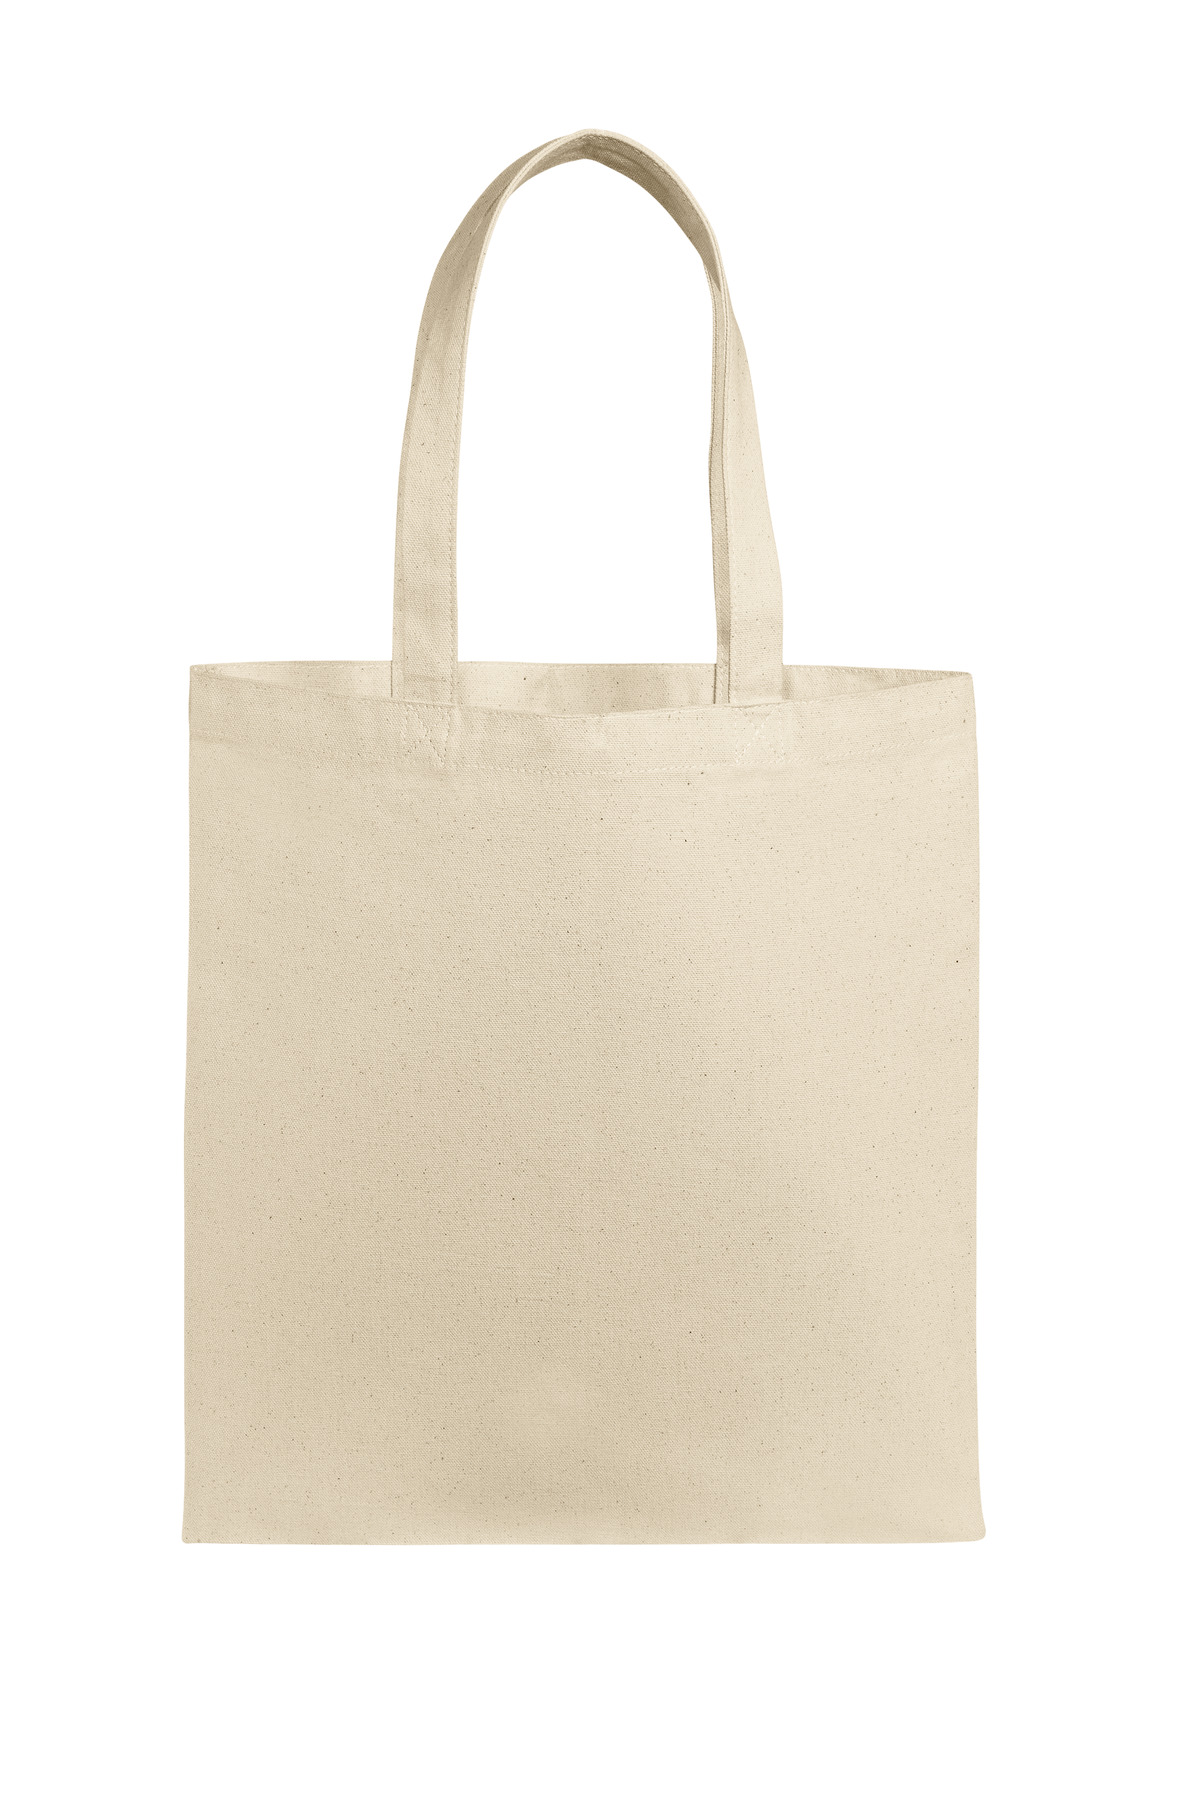 Buy Port Authority Eco Blend Canvas Tote - Port Authority Online at ...